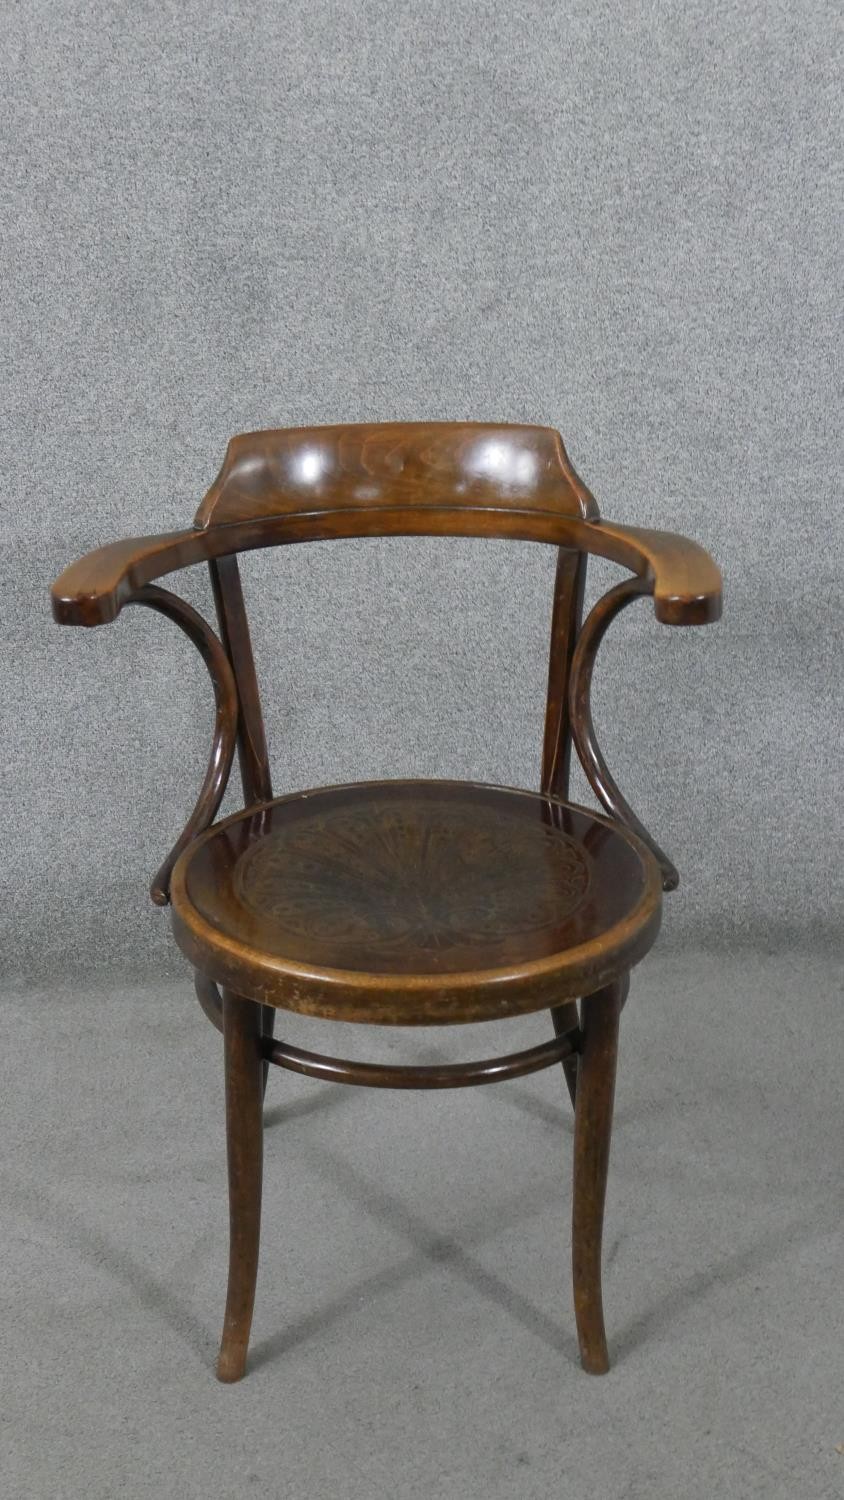 A late 19th/early 20th century Thonet style bentwood open armchair, with a circular pokerwork seat